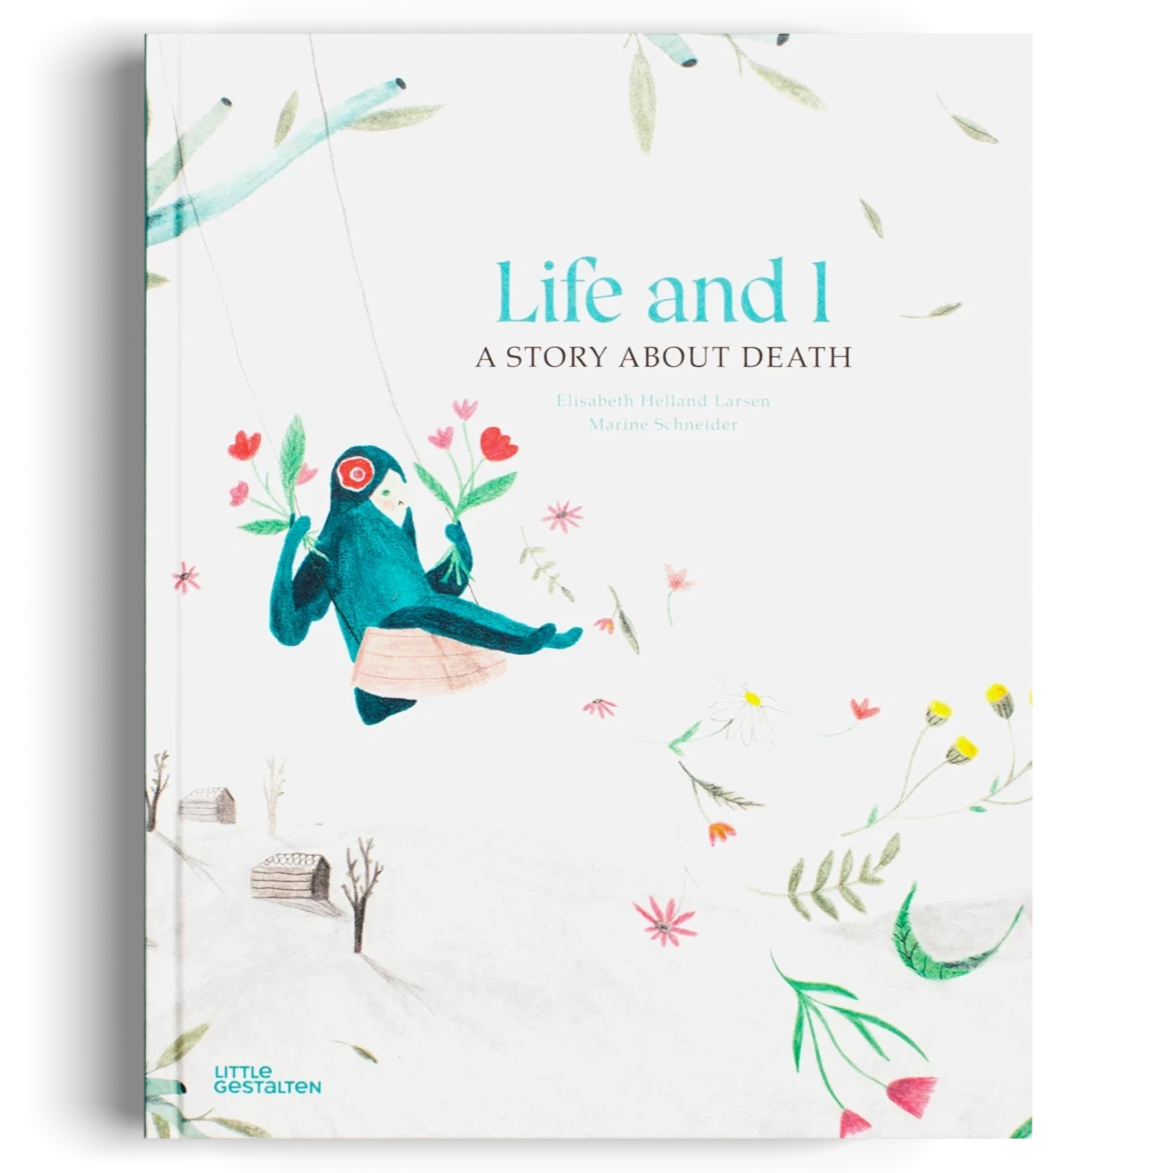 Book : Life and I. A Story about Death